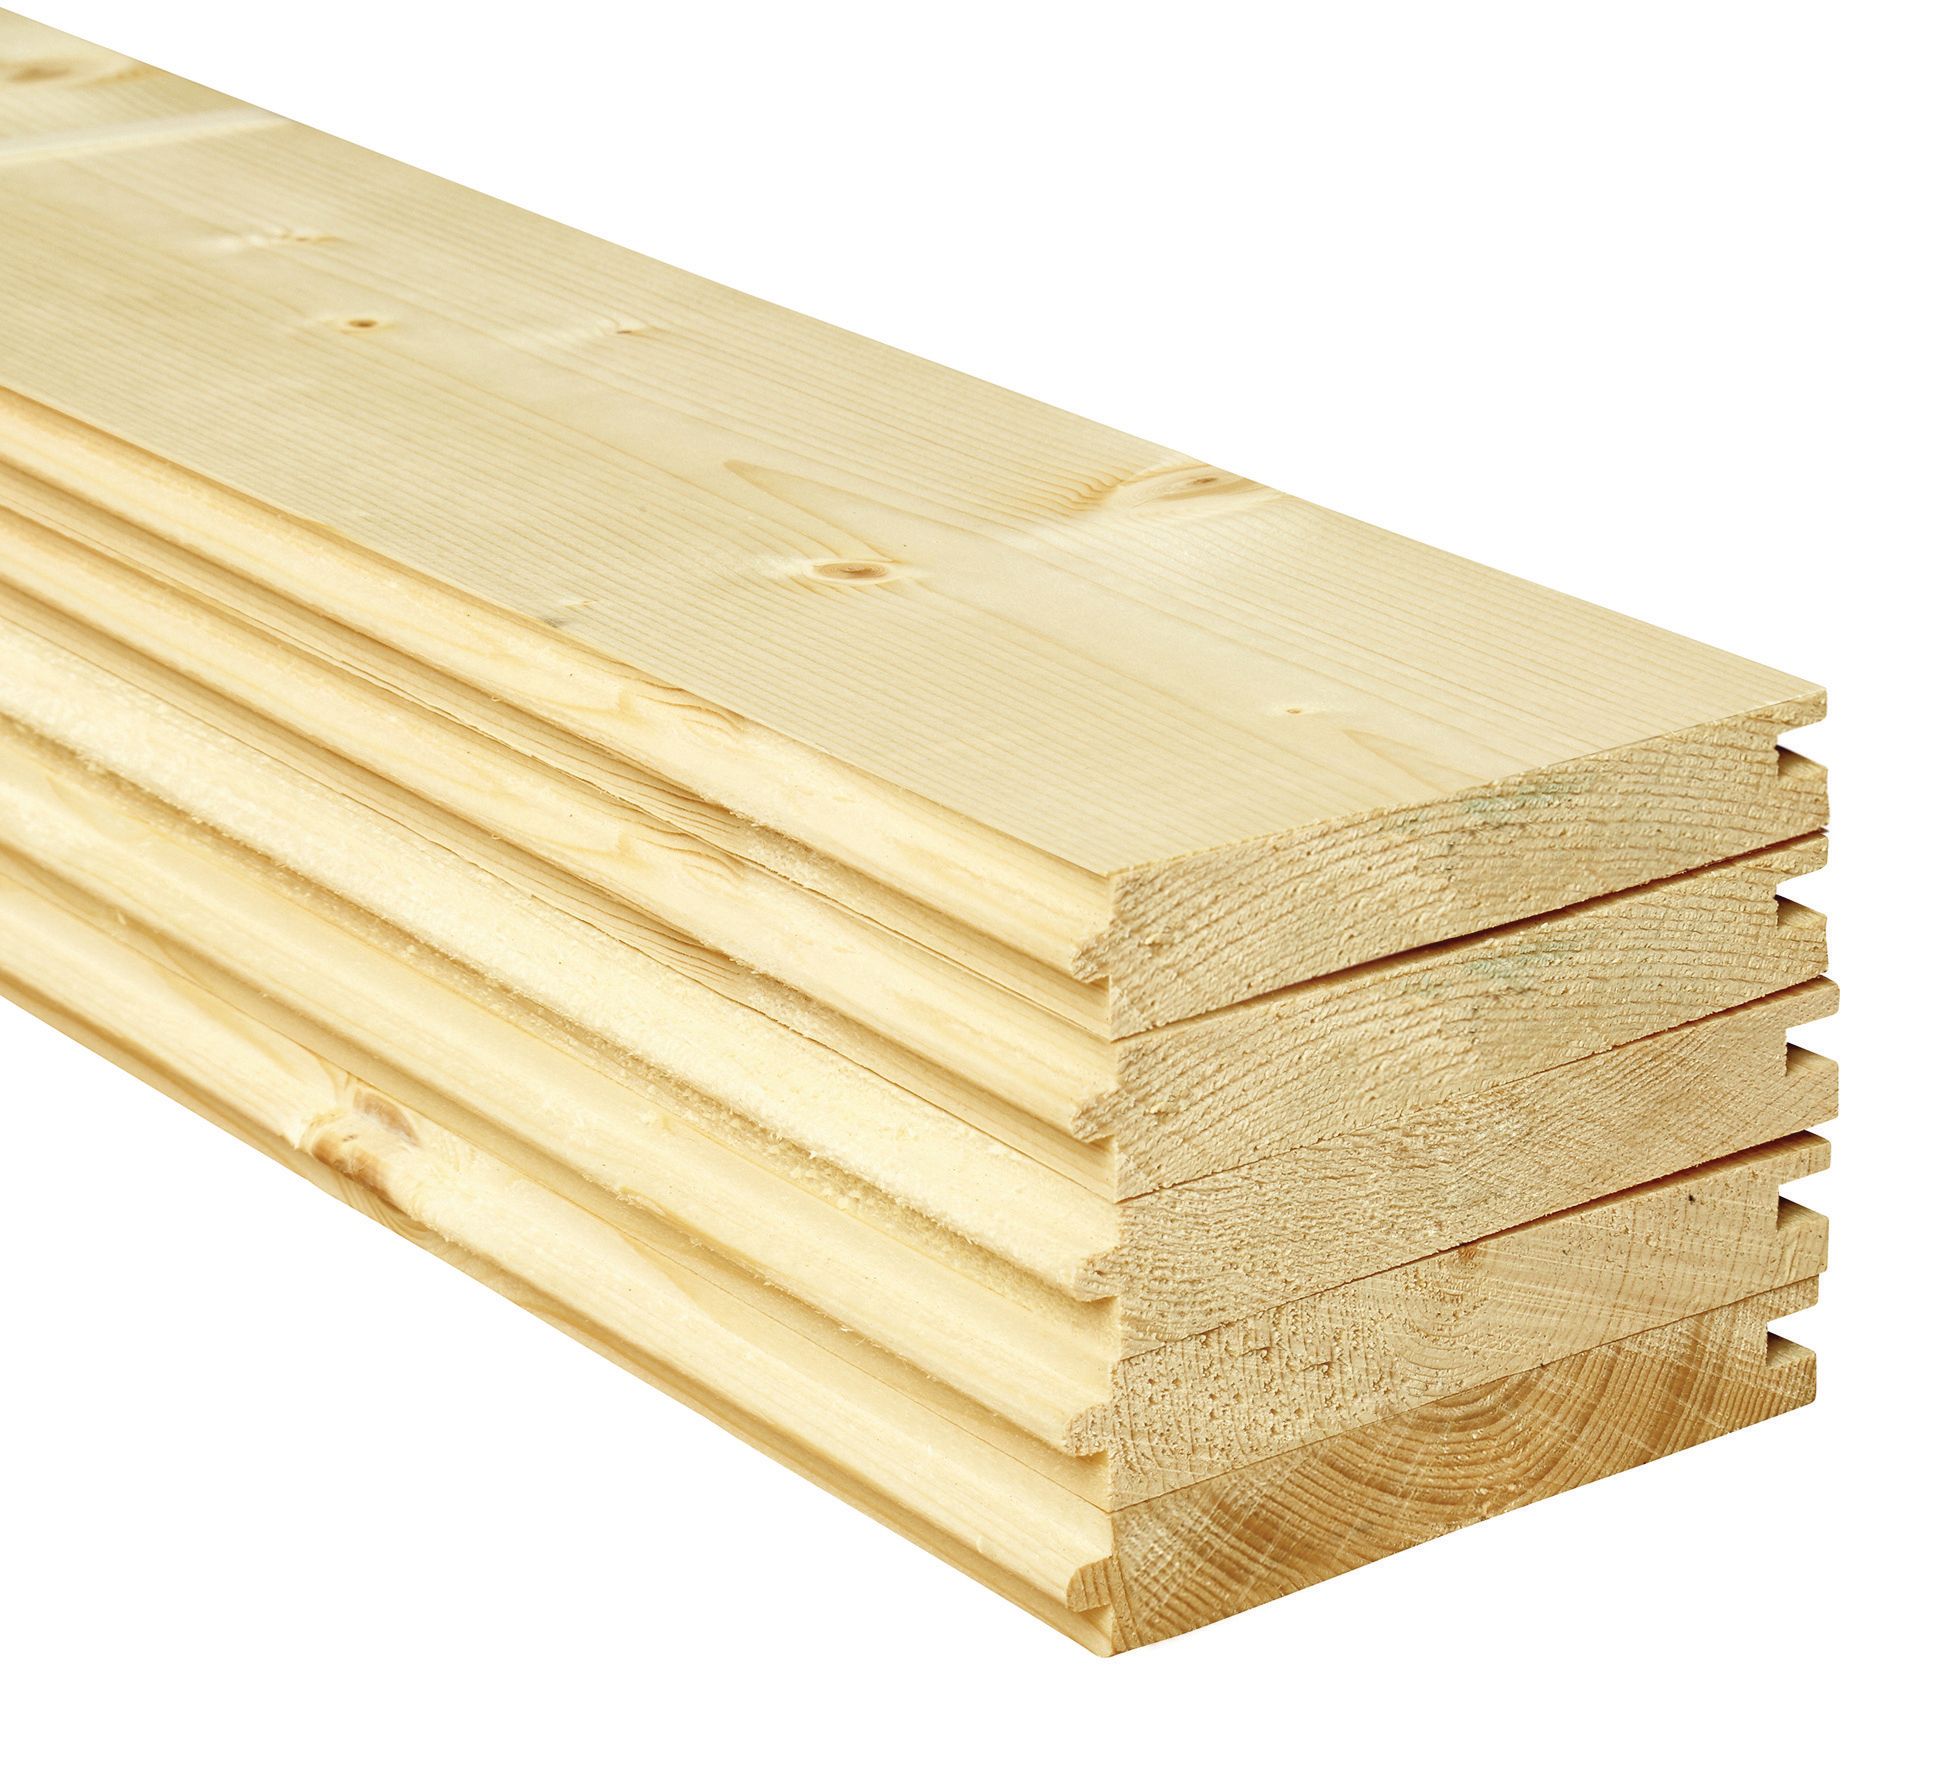 Image of Wickes PTG Timber Floorboards - 21mm x 137mm x 2400mm - Pack of 5